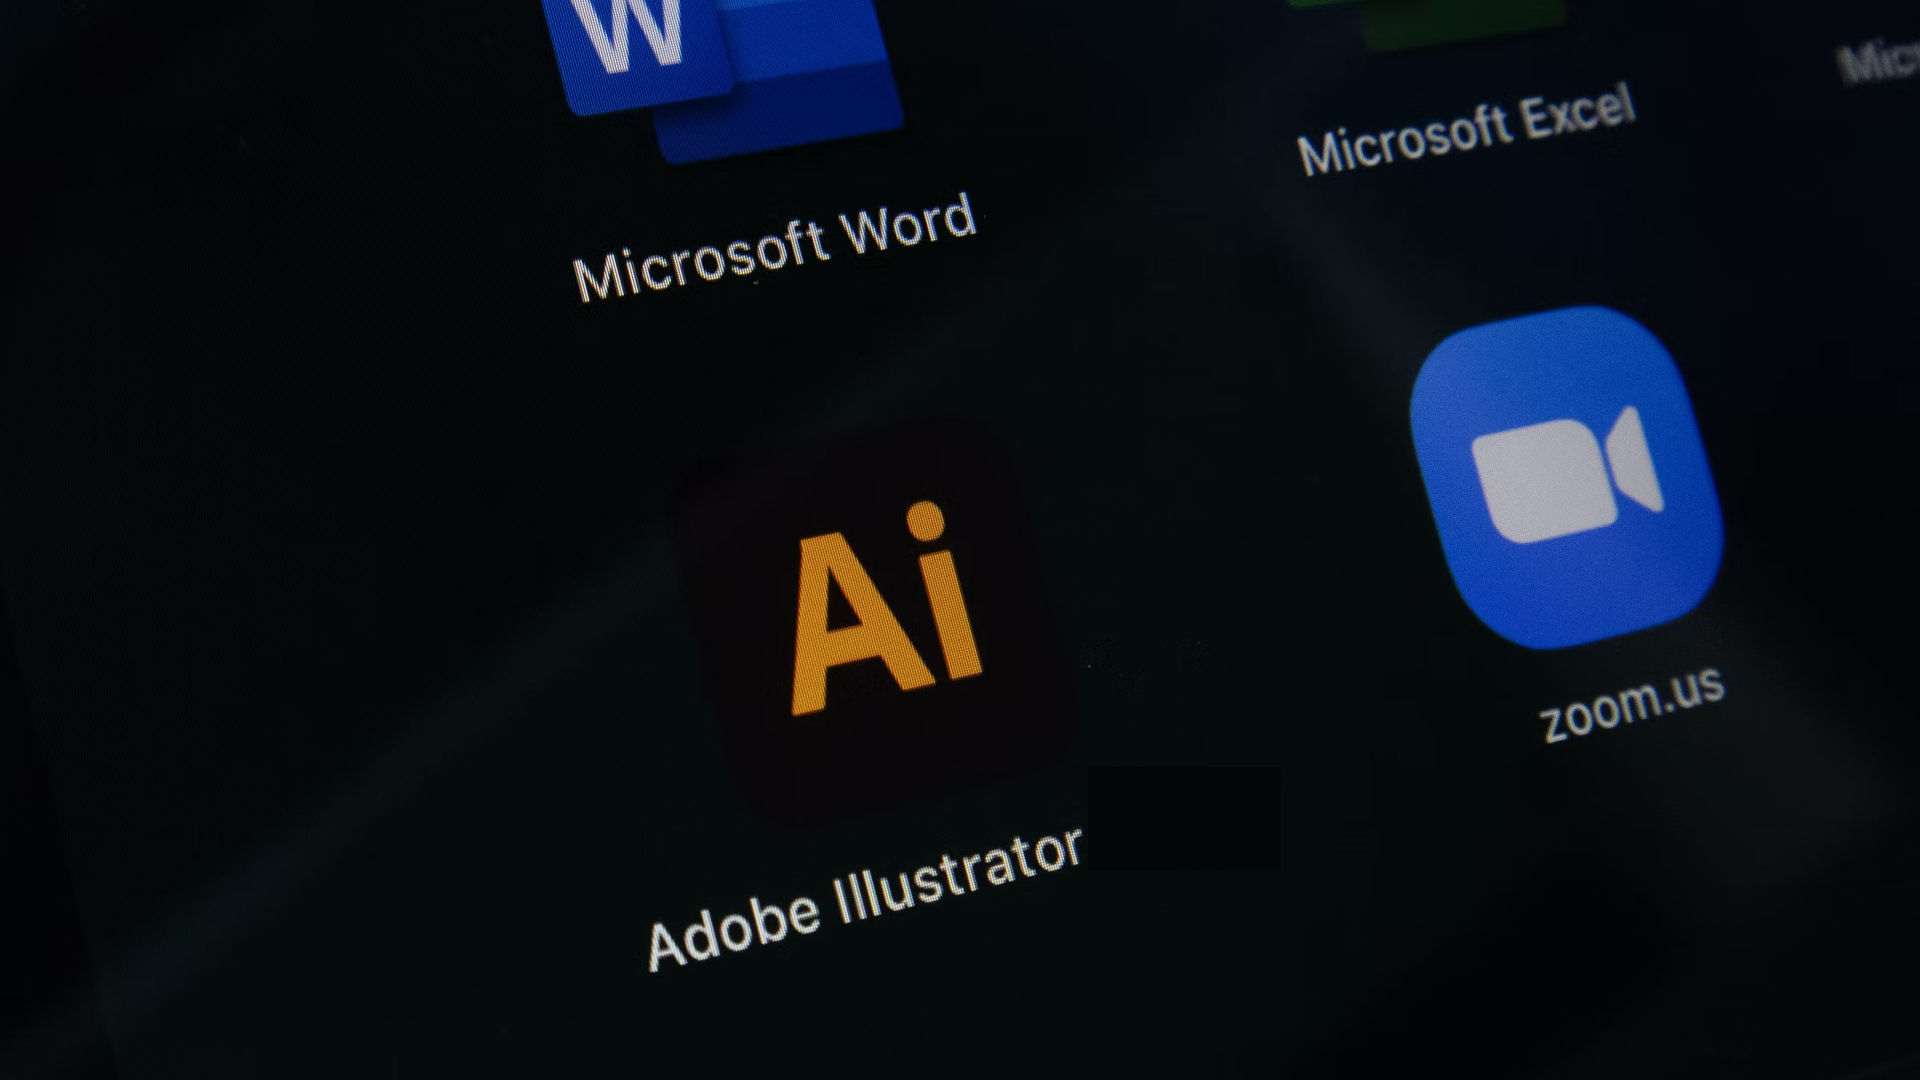 Where Is Pathfinder in Illustrator